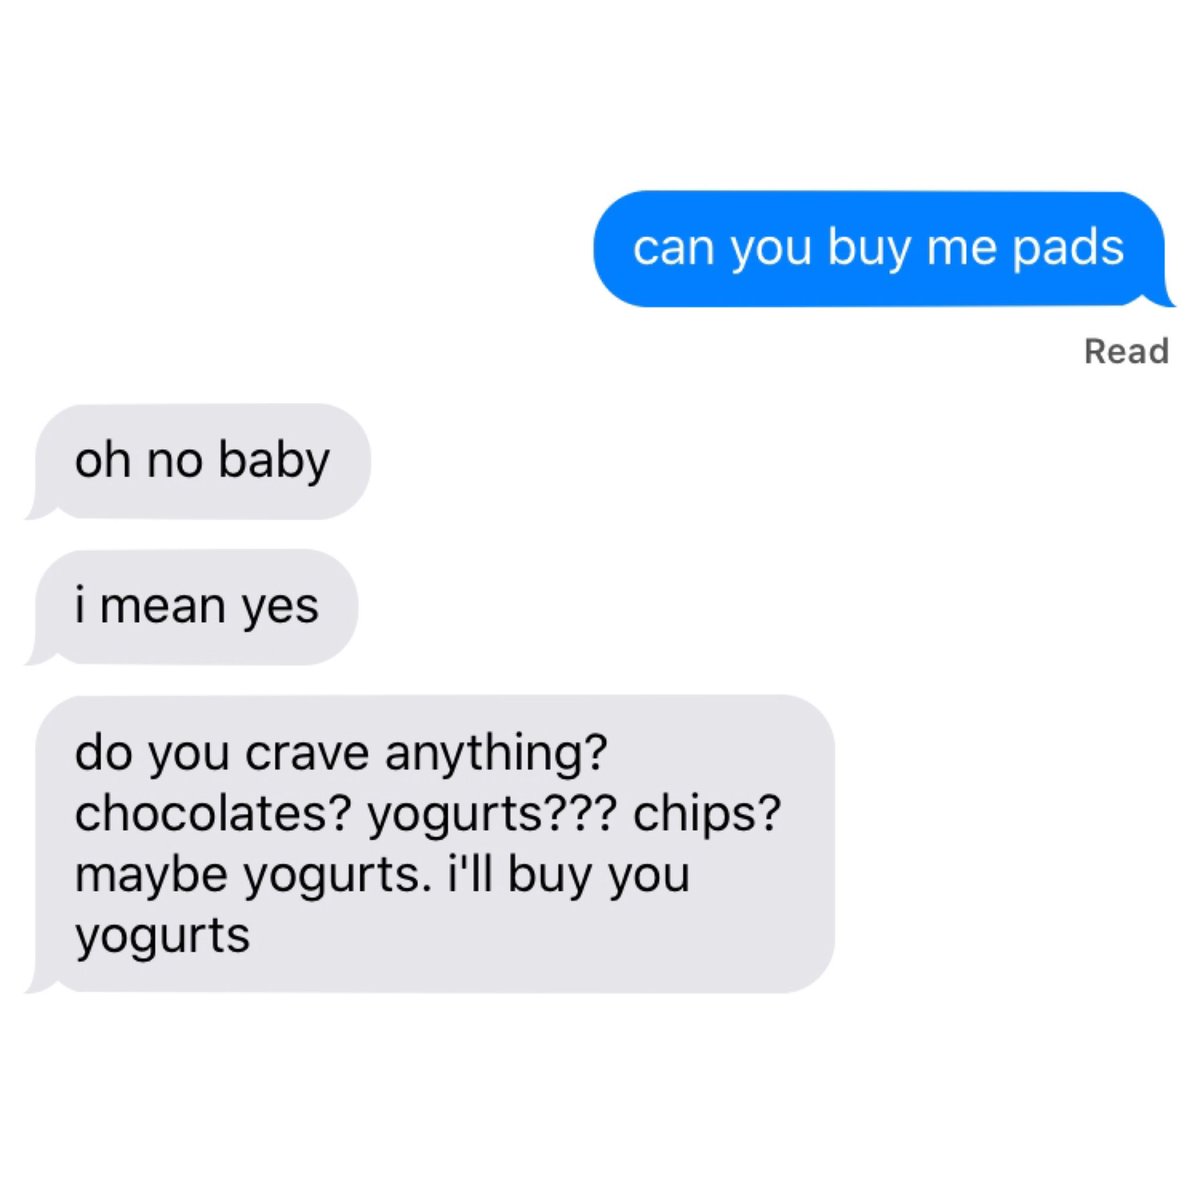 gfriend responding to “can you buy me pads” texts; a thread